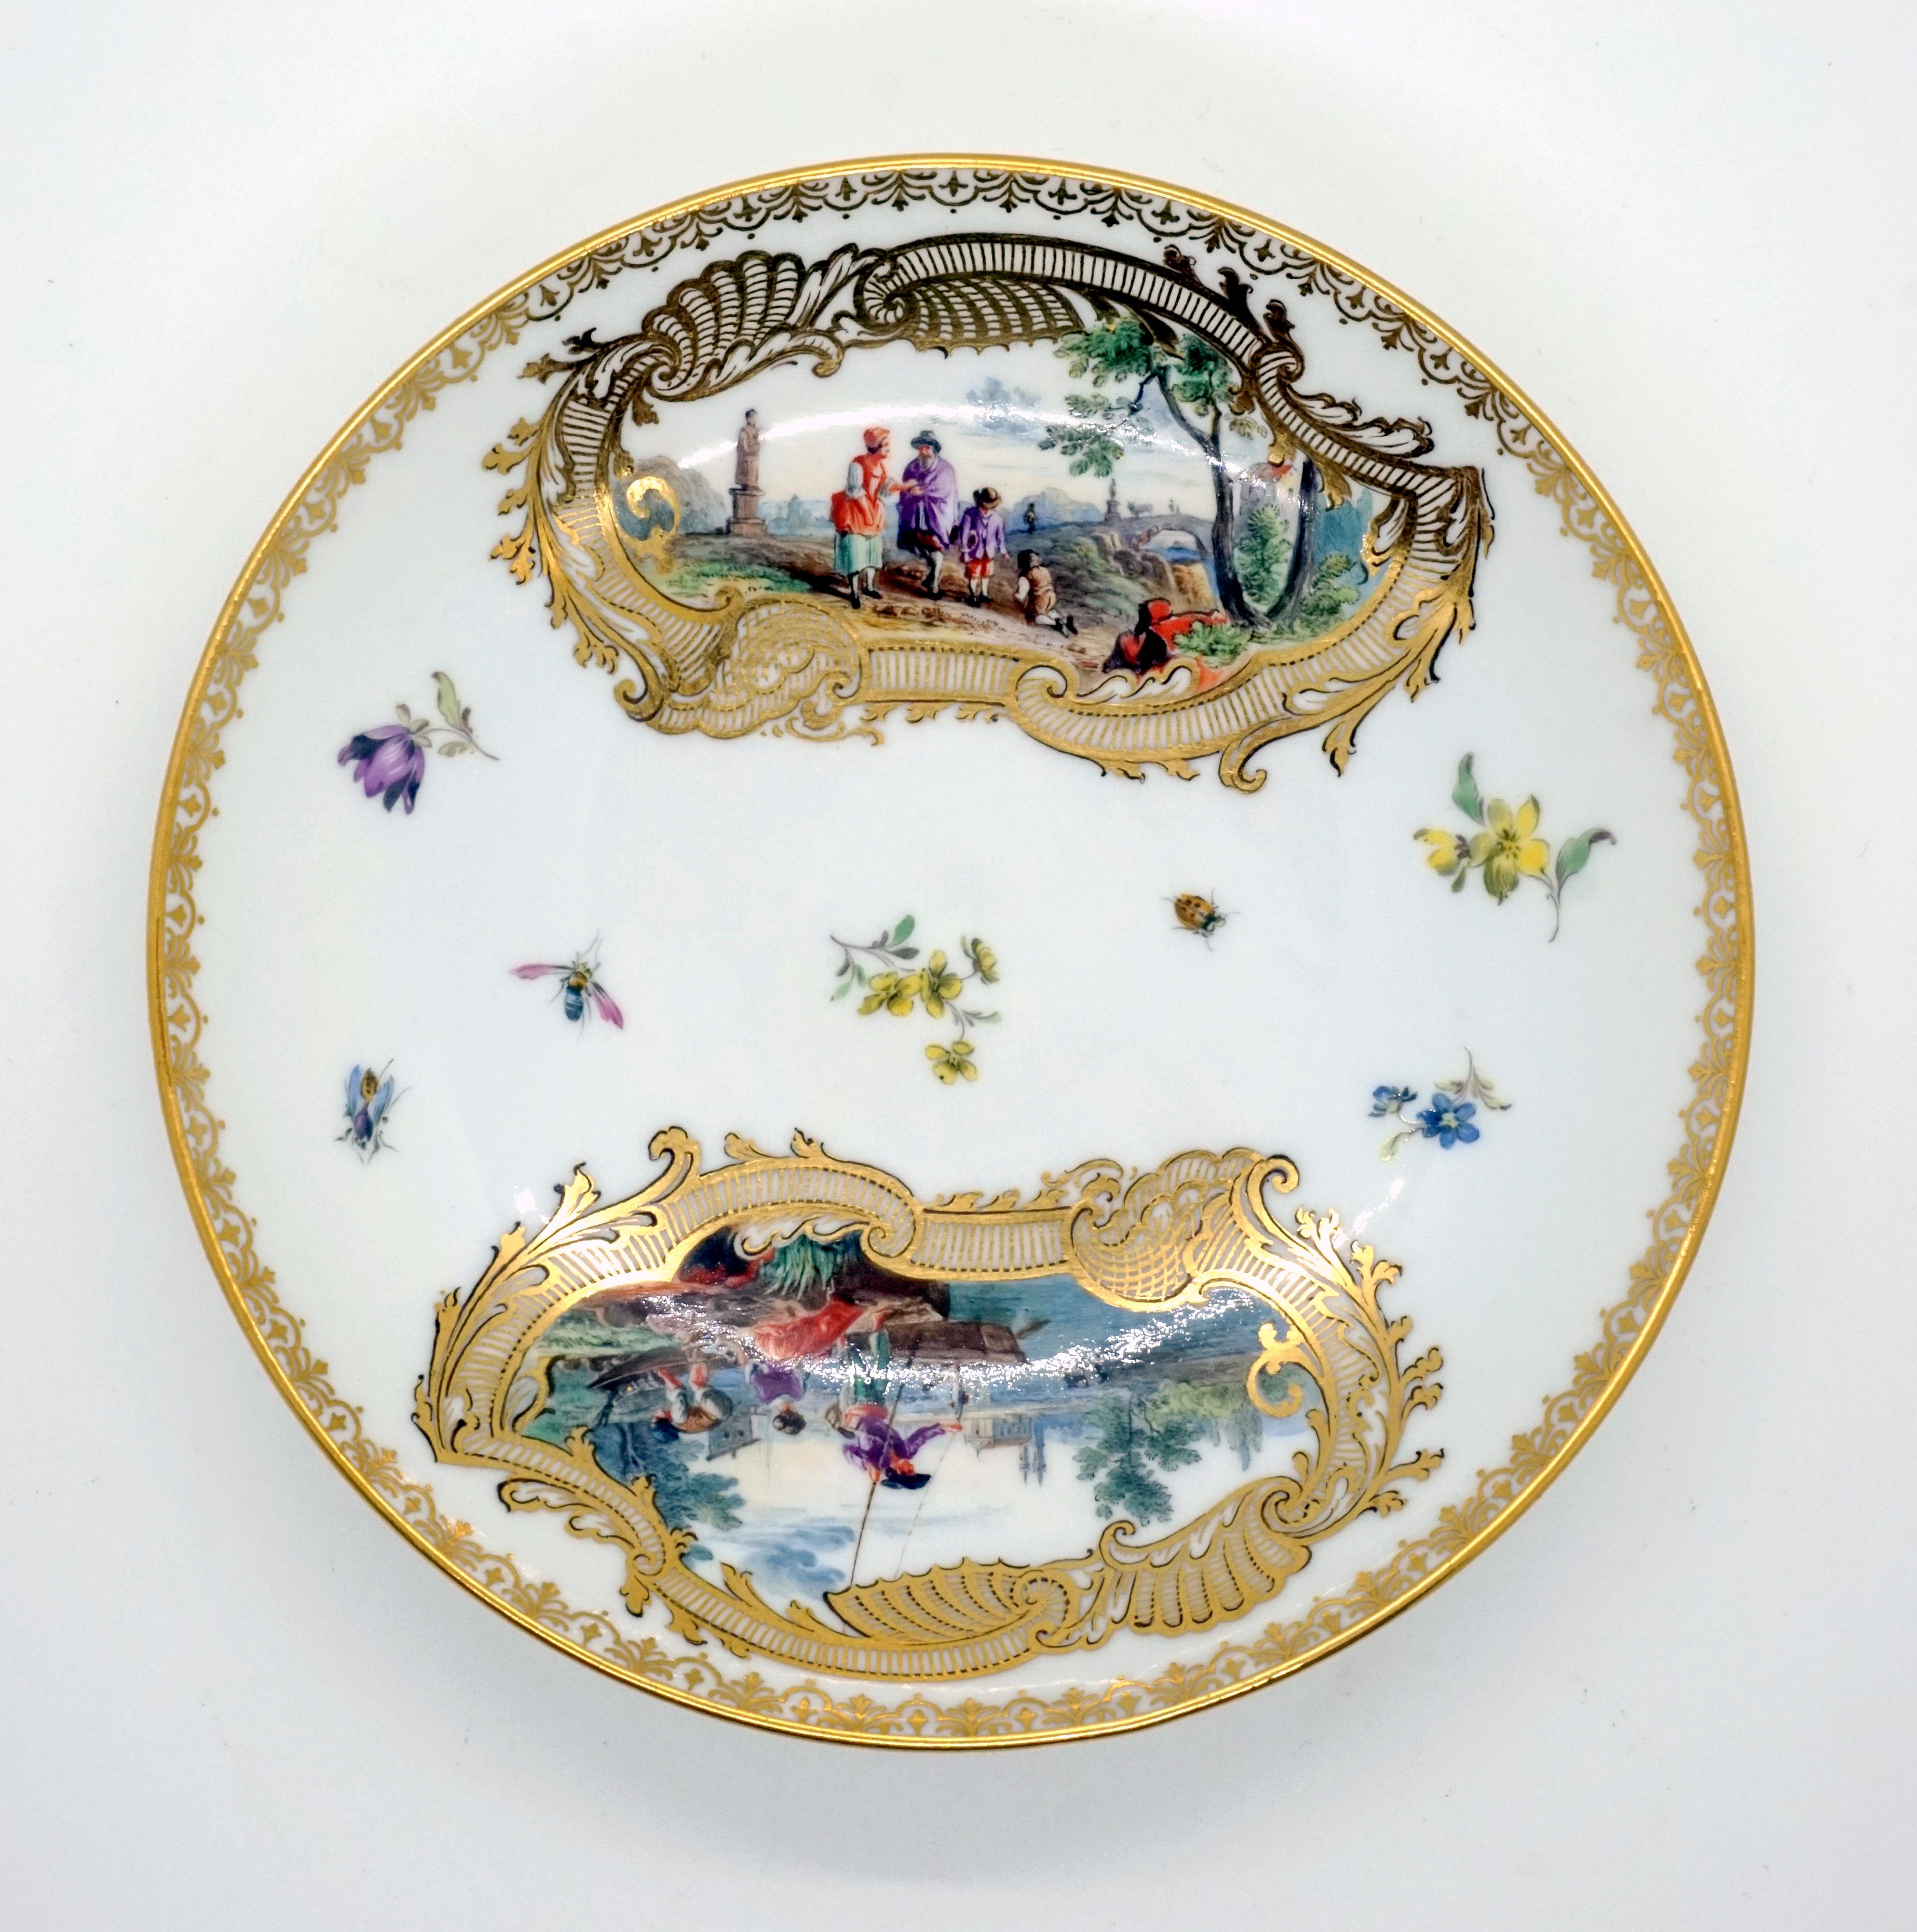 Eary 19th Century Meissen Cup and Saucer with Kauffahrtei Scenes and Gold Decor 1